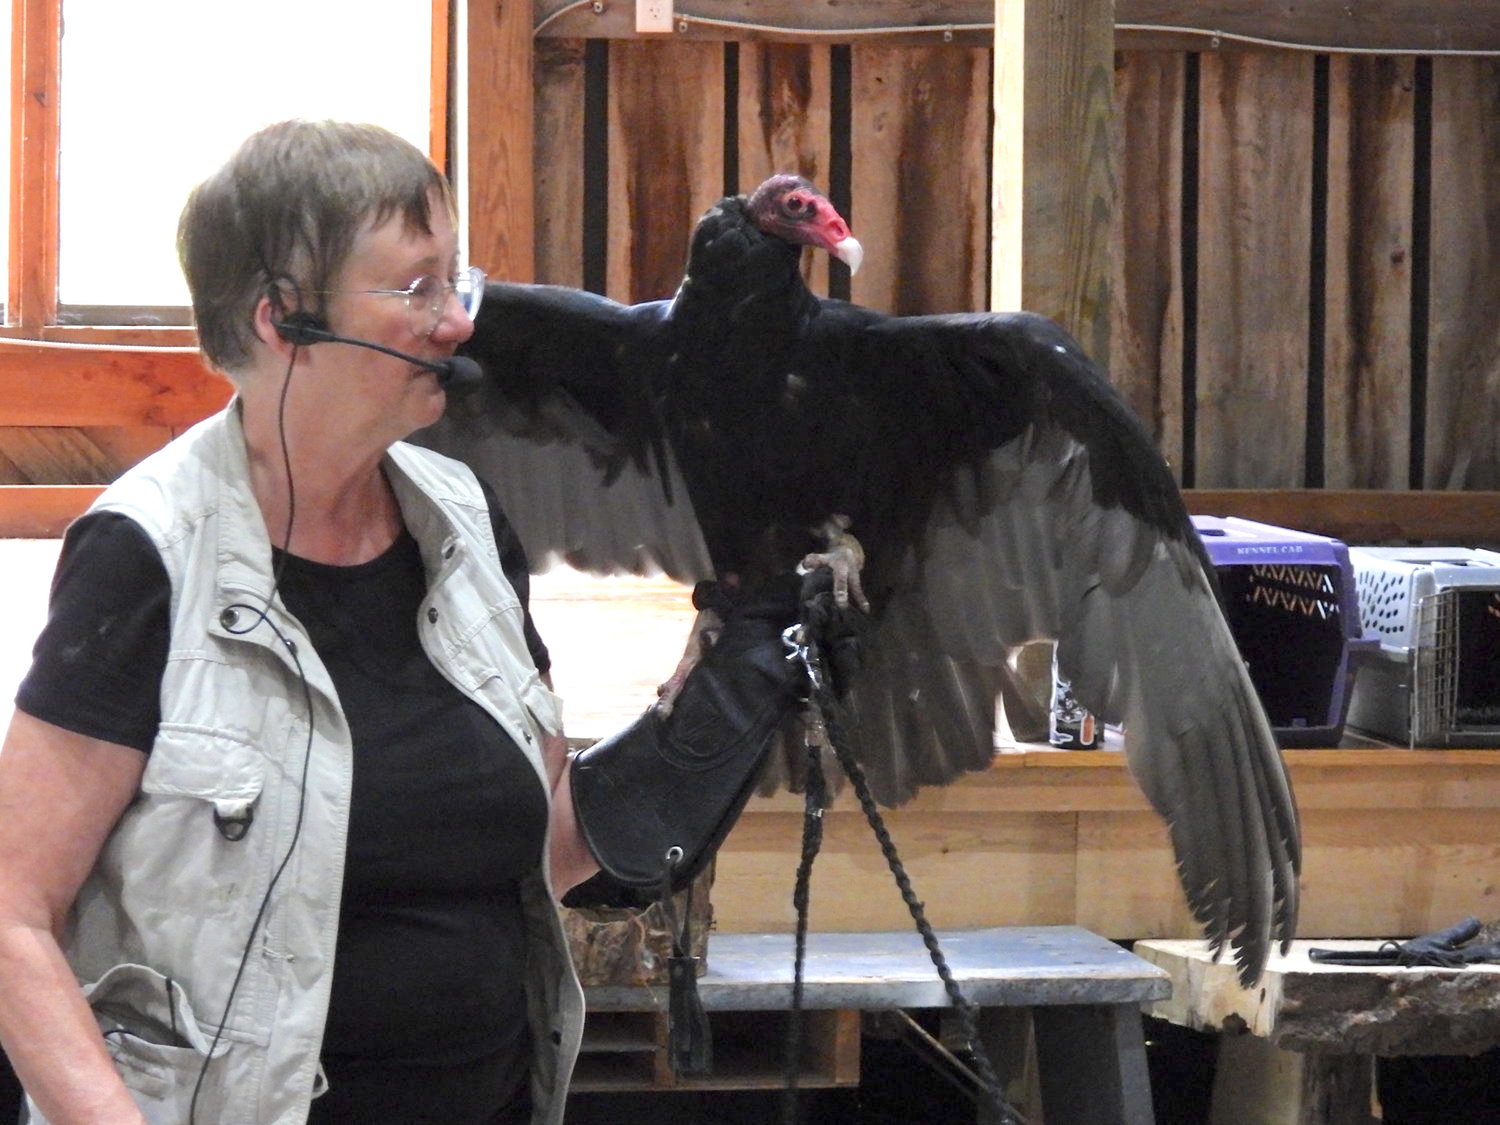 Cindy Page, of the Page Wildlife Center, gives a presentation of various birds of prey, including this turkey vulture, at the Great Swamp Conservancy in 2021.